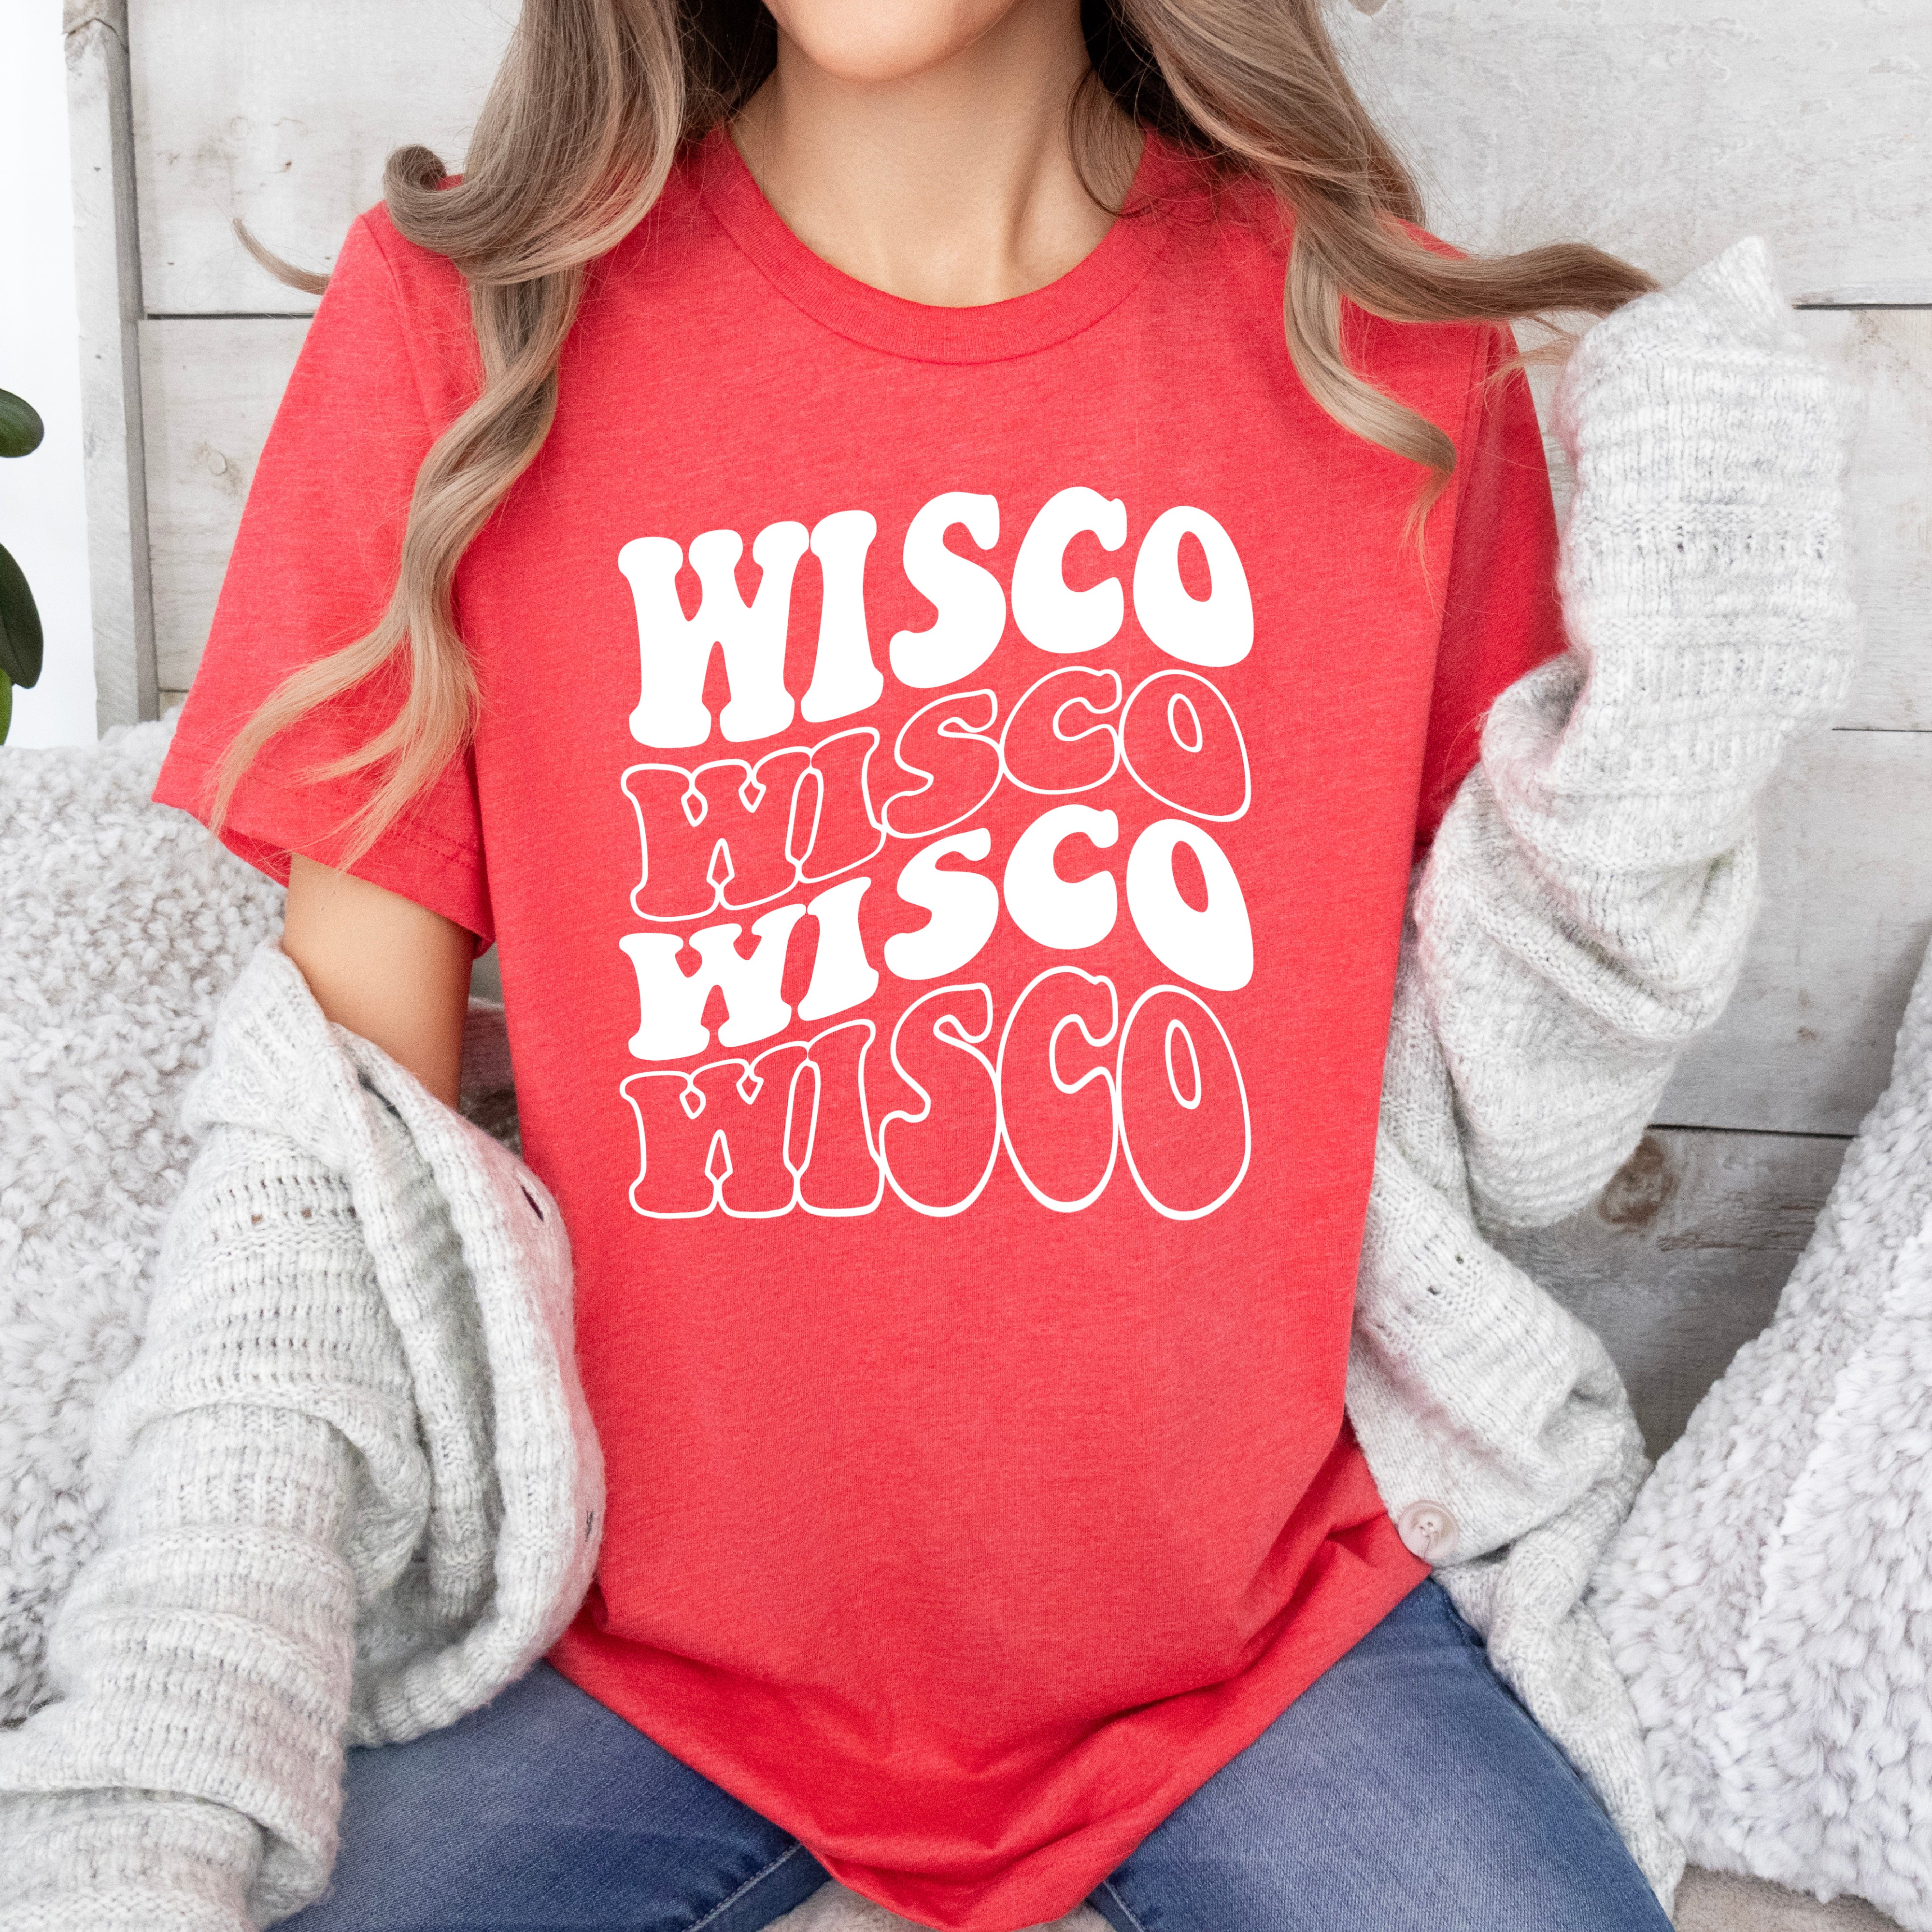 Wisco Tee in Red or White